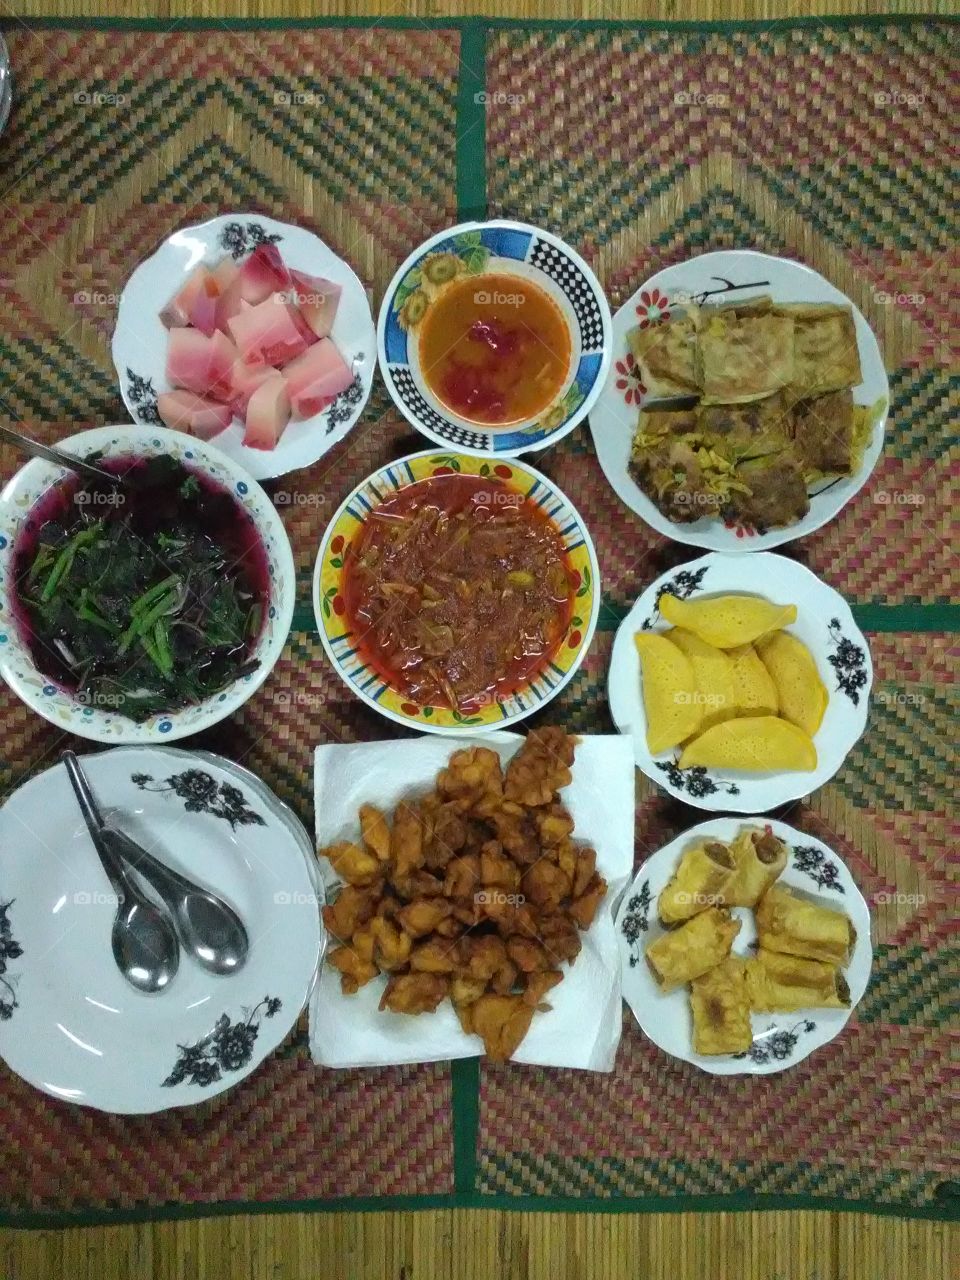 Malaysian homemade food for breaking fast - Sambal bilis, sardin roll, Malaysian traditional food, Sarawak apom; murtabak, pudding, purple spinach soup and introducing the special, spiciest, tastiest, Hot & Spicy Chicken Popcorn